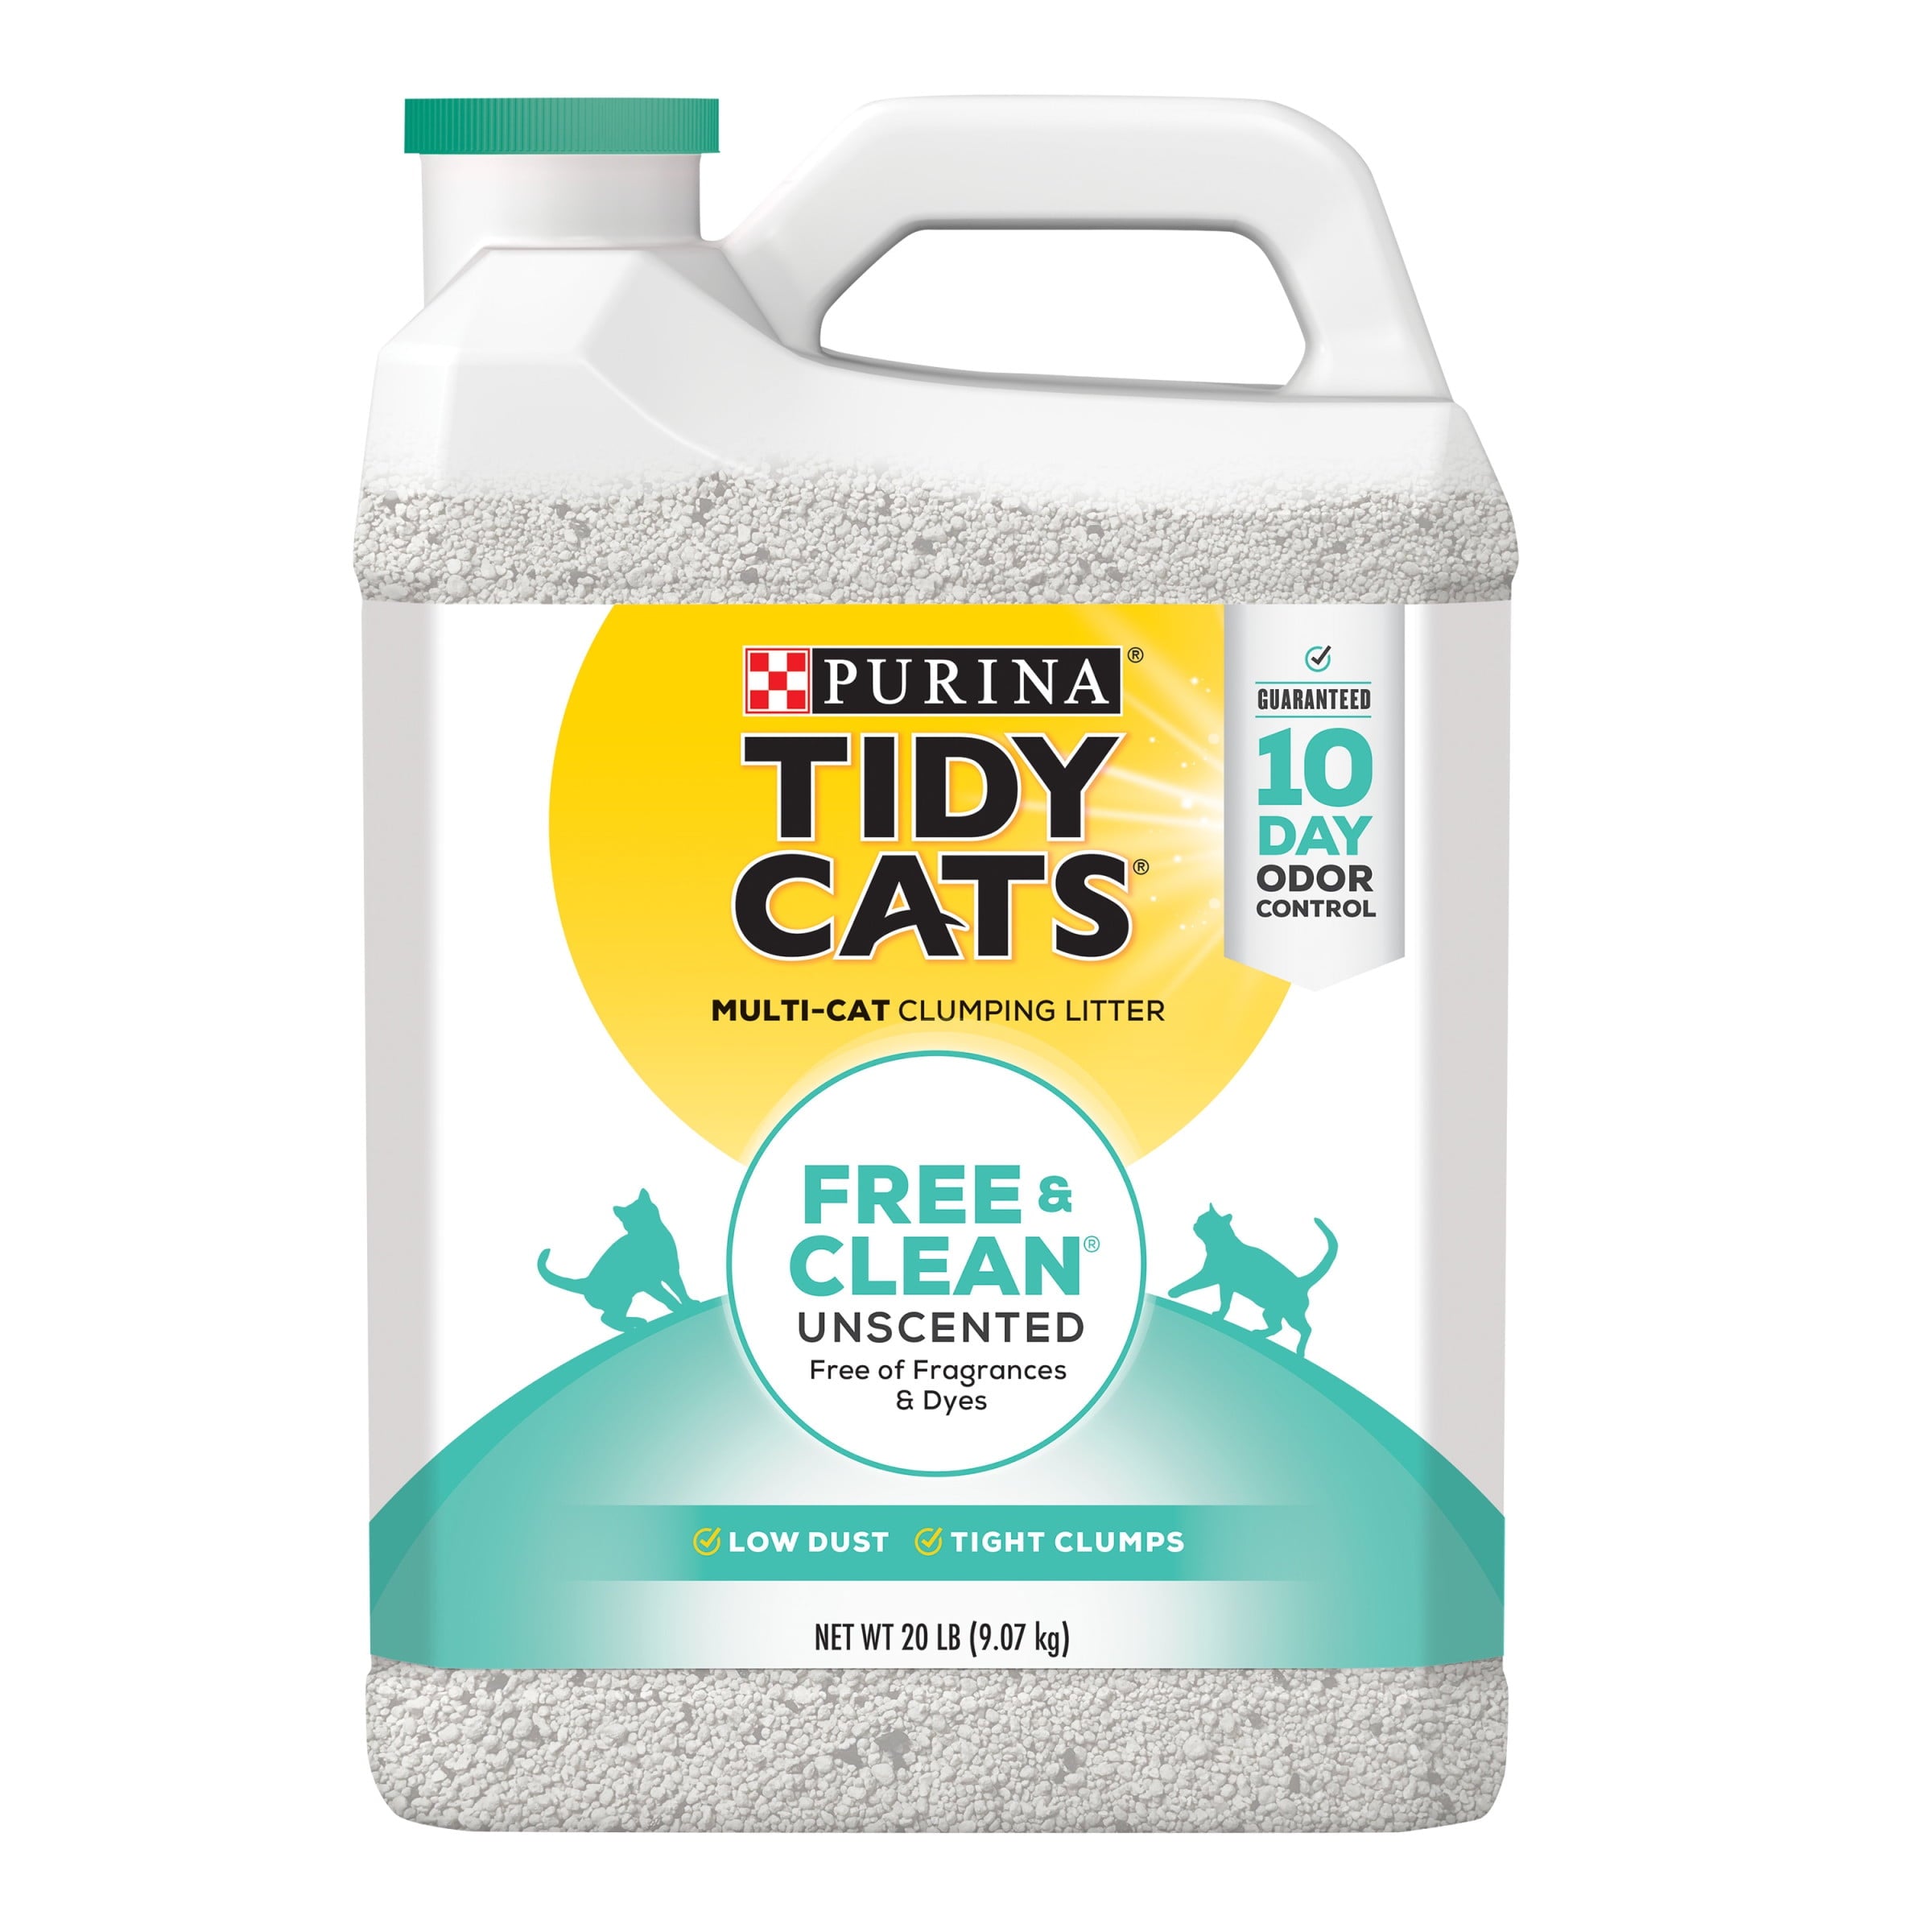 Wholesale prices with free shipping all over United States Purina Tidy Cats Clumping Cat Litter, Free & Clean Unscented Multi Cat Litter, 20 lb. Jug - Steven Deals